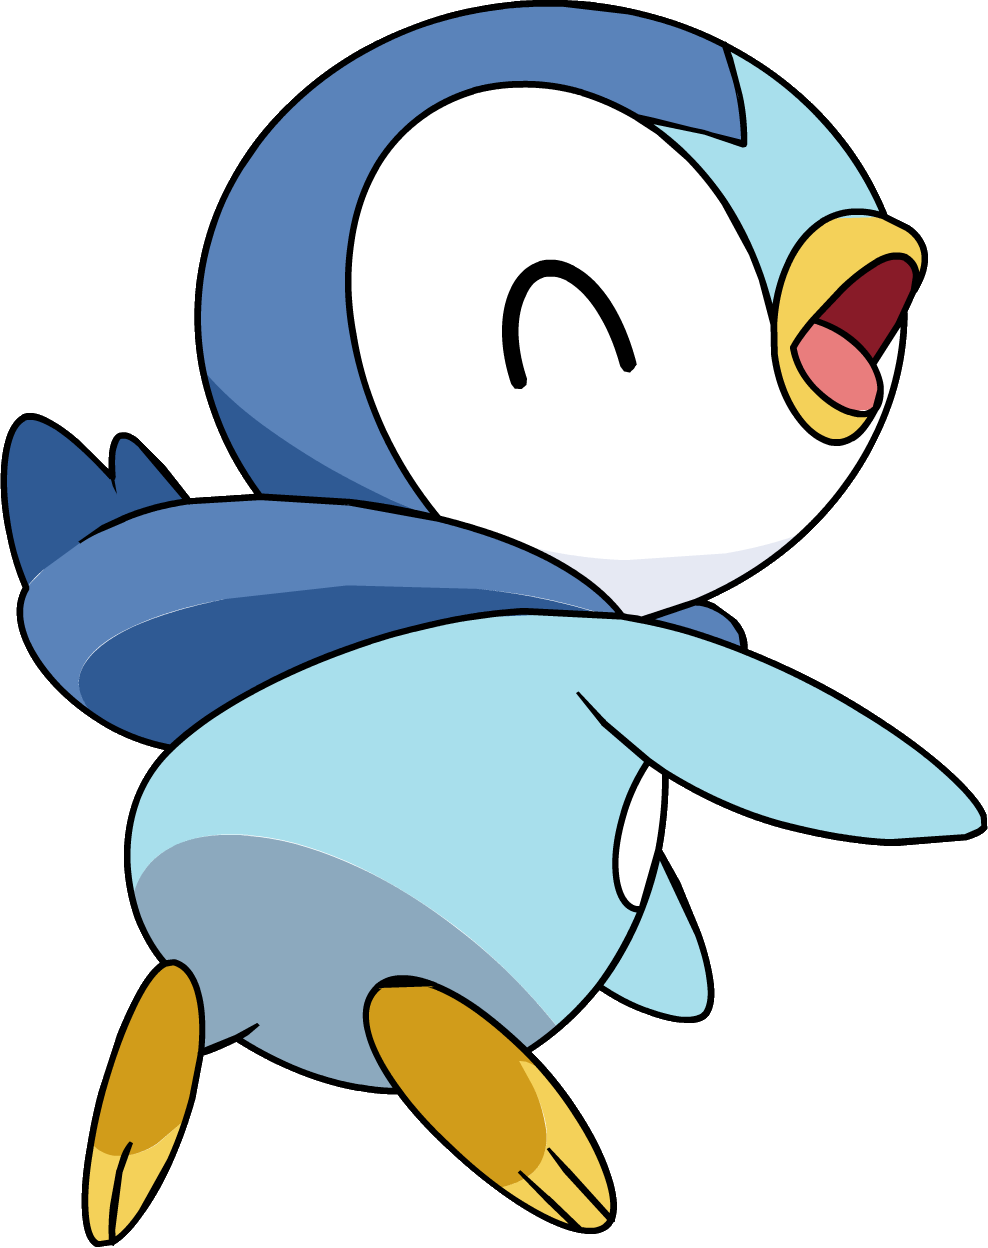 Piplup Pokemon Characters Images Pokemon Images - Pokemon Piplup Png (988x1248)